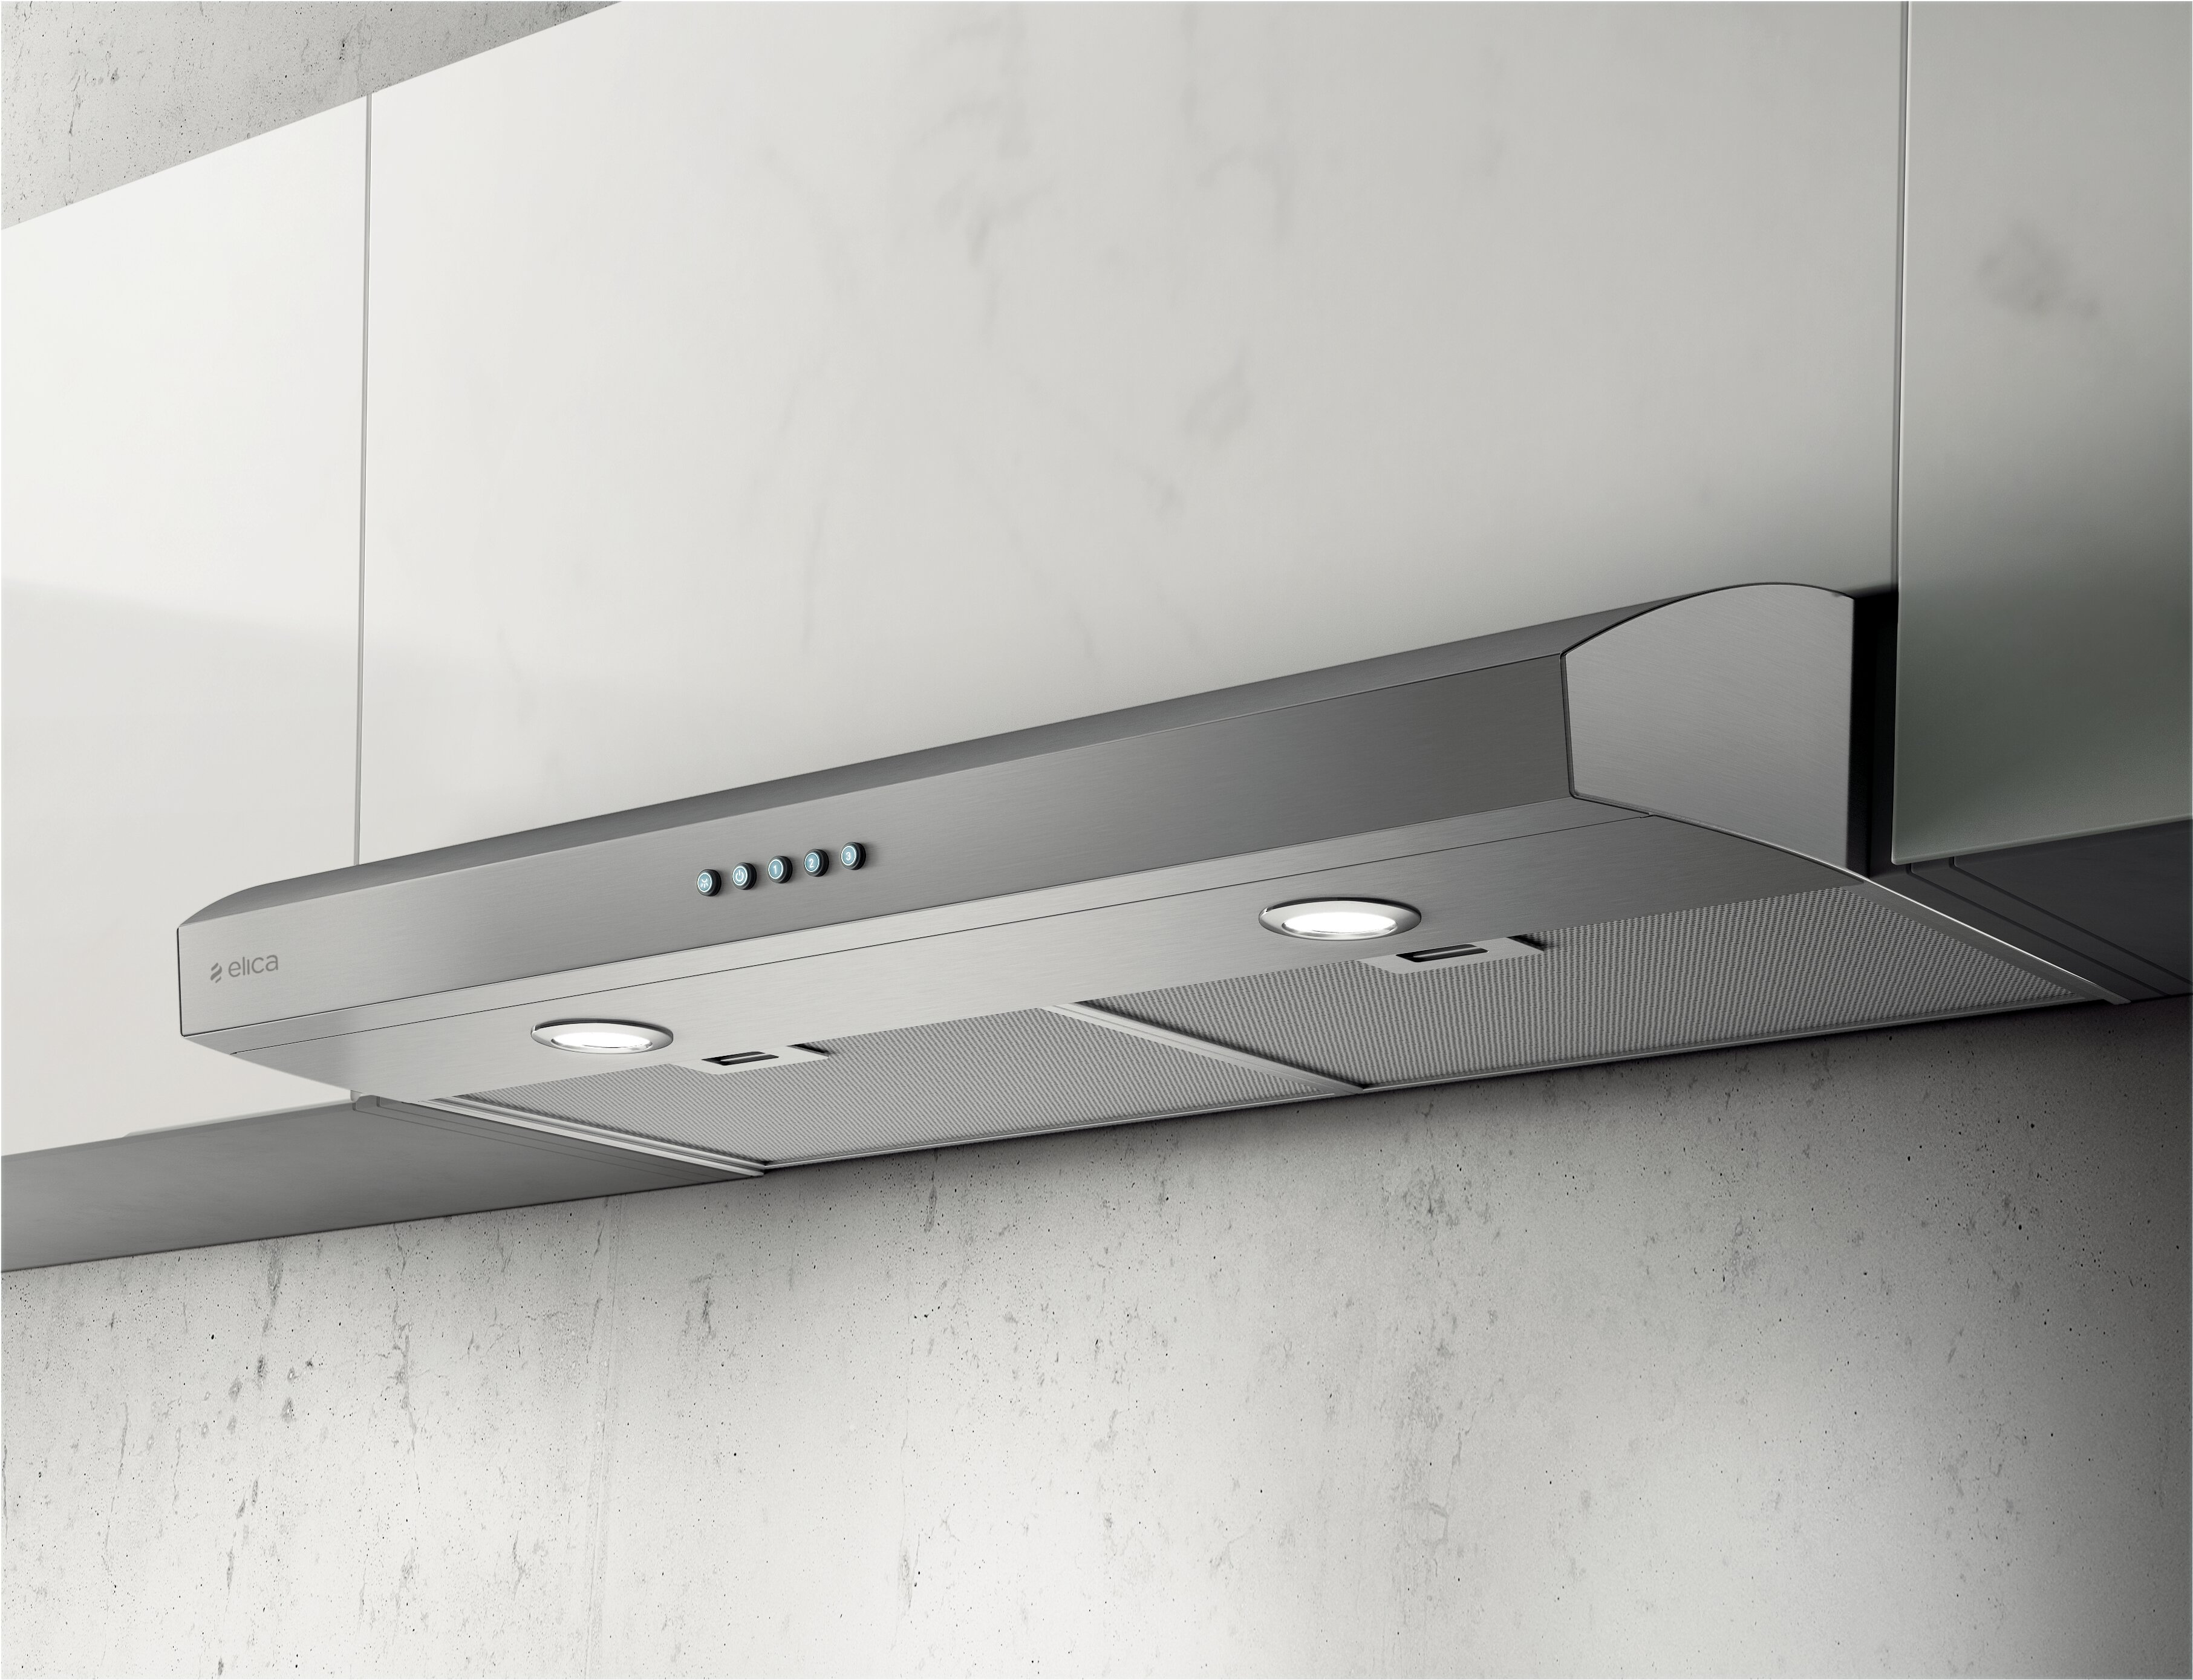 Vent-A-Hood 30 300 Cubic Feet Per Minute Ducted Under Cabinet